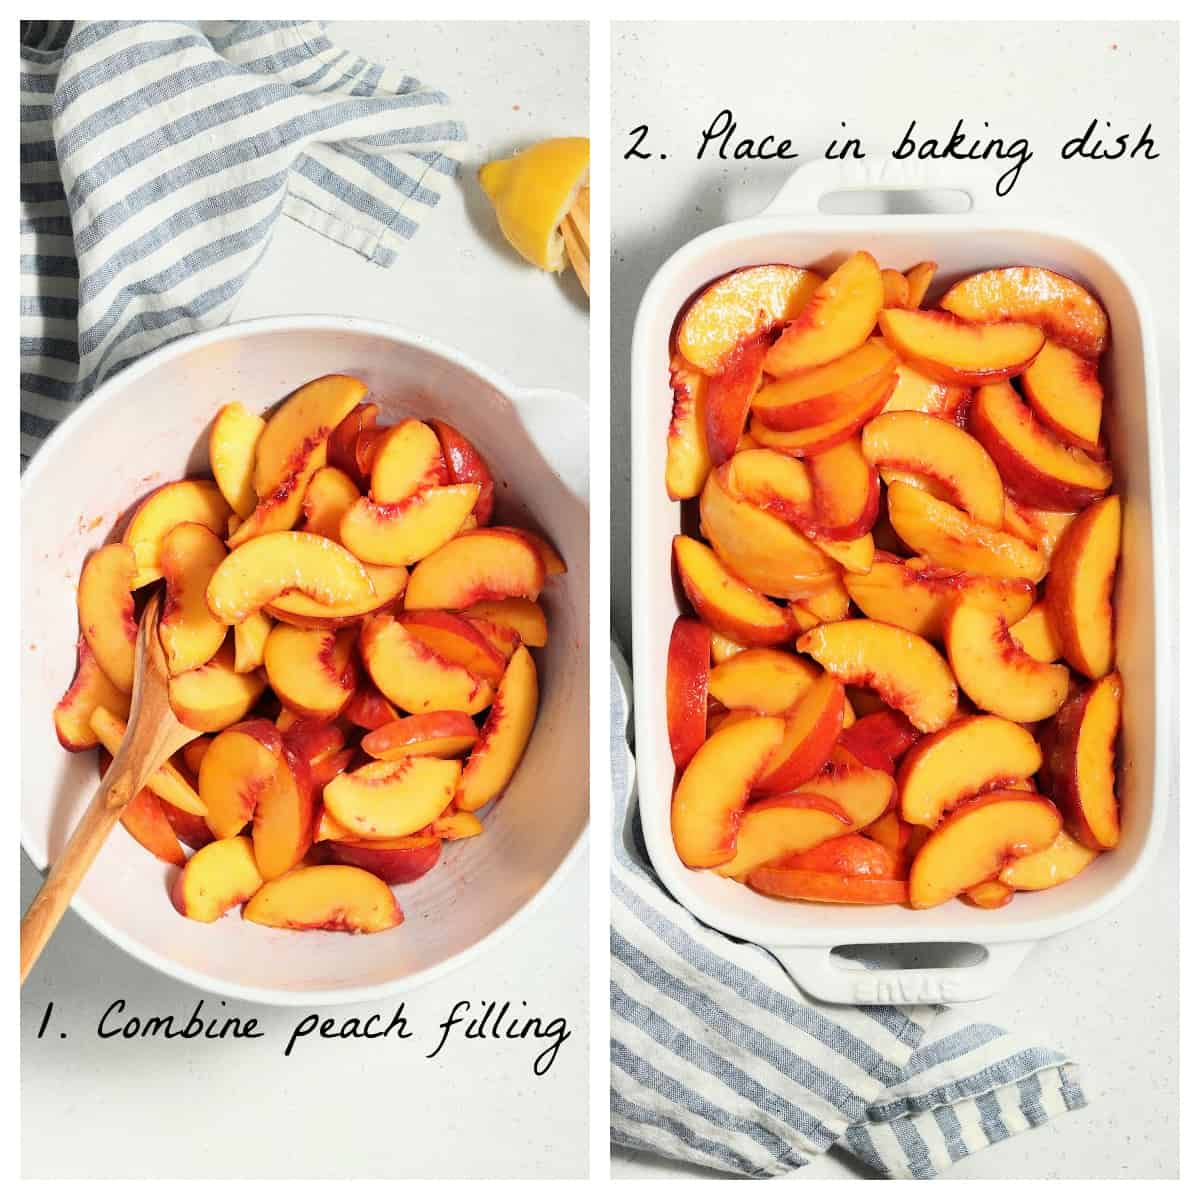 Two process photos o mixing the peaches with sugar and placing them in a baking dish.